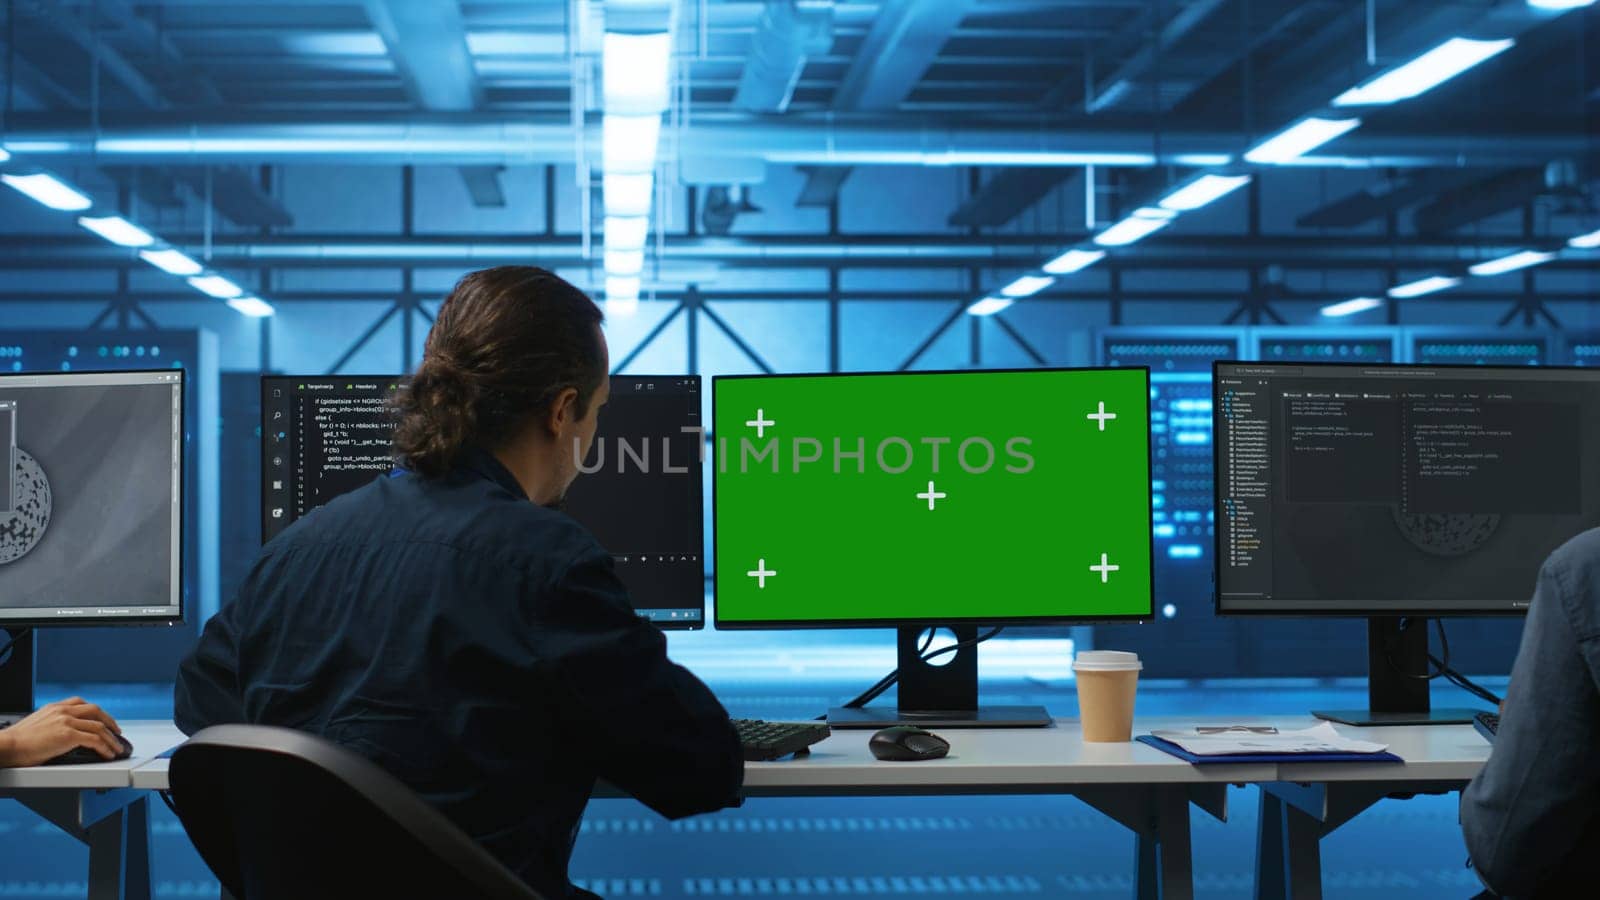 IT support workers in data center coding on green screen computers, upgrading equipment. Multiethnic team of engineers at PC desk overseeing server clusters using mockup monitors